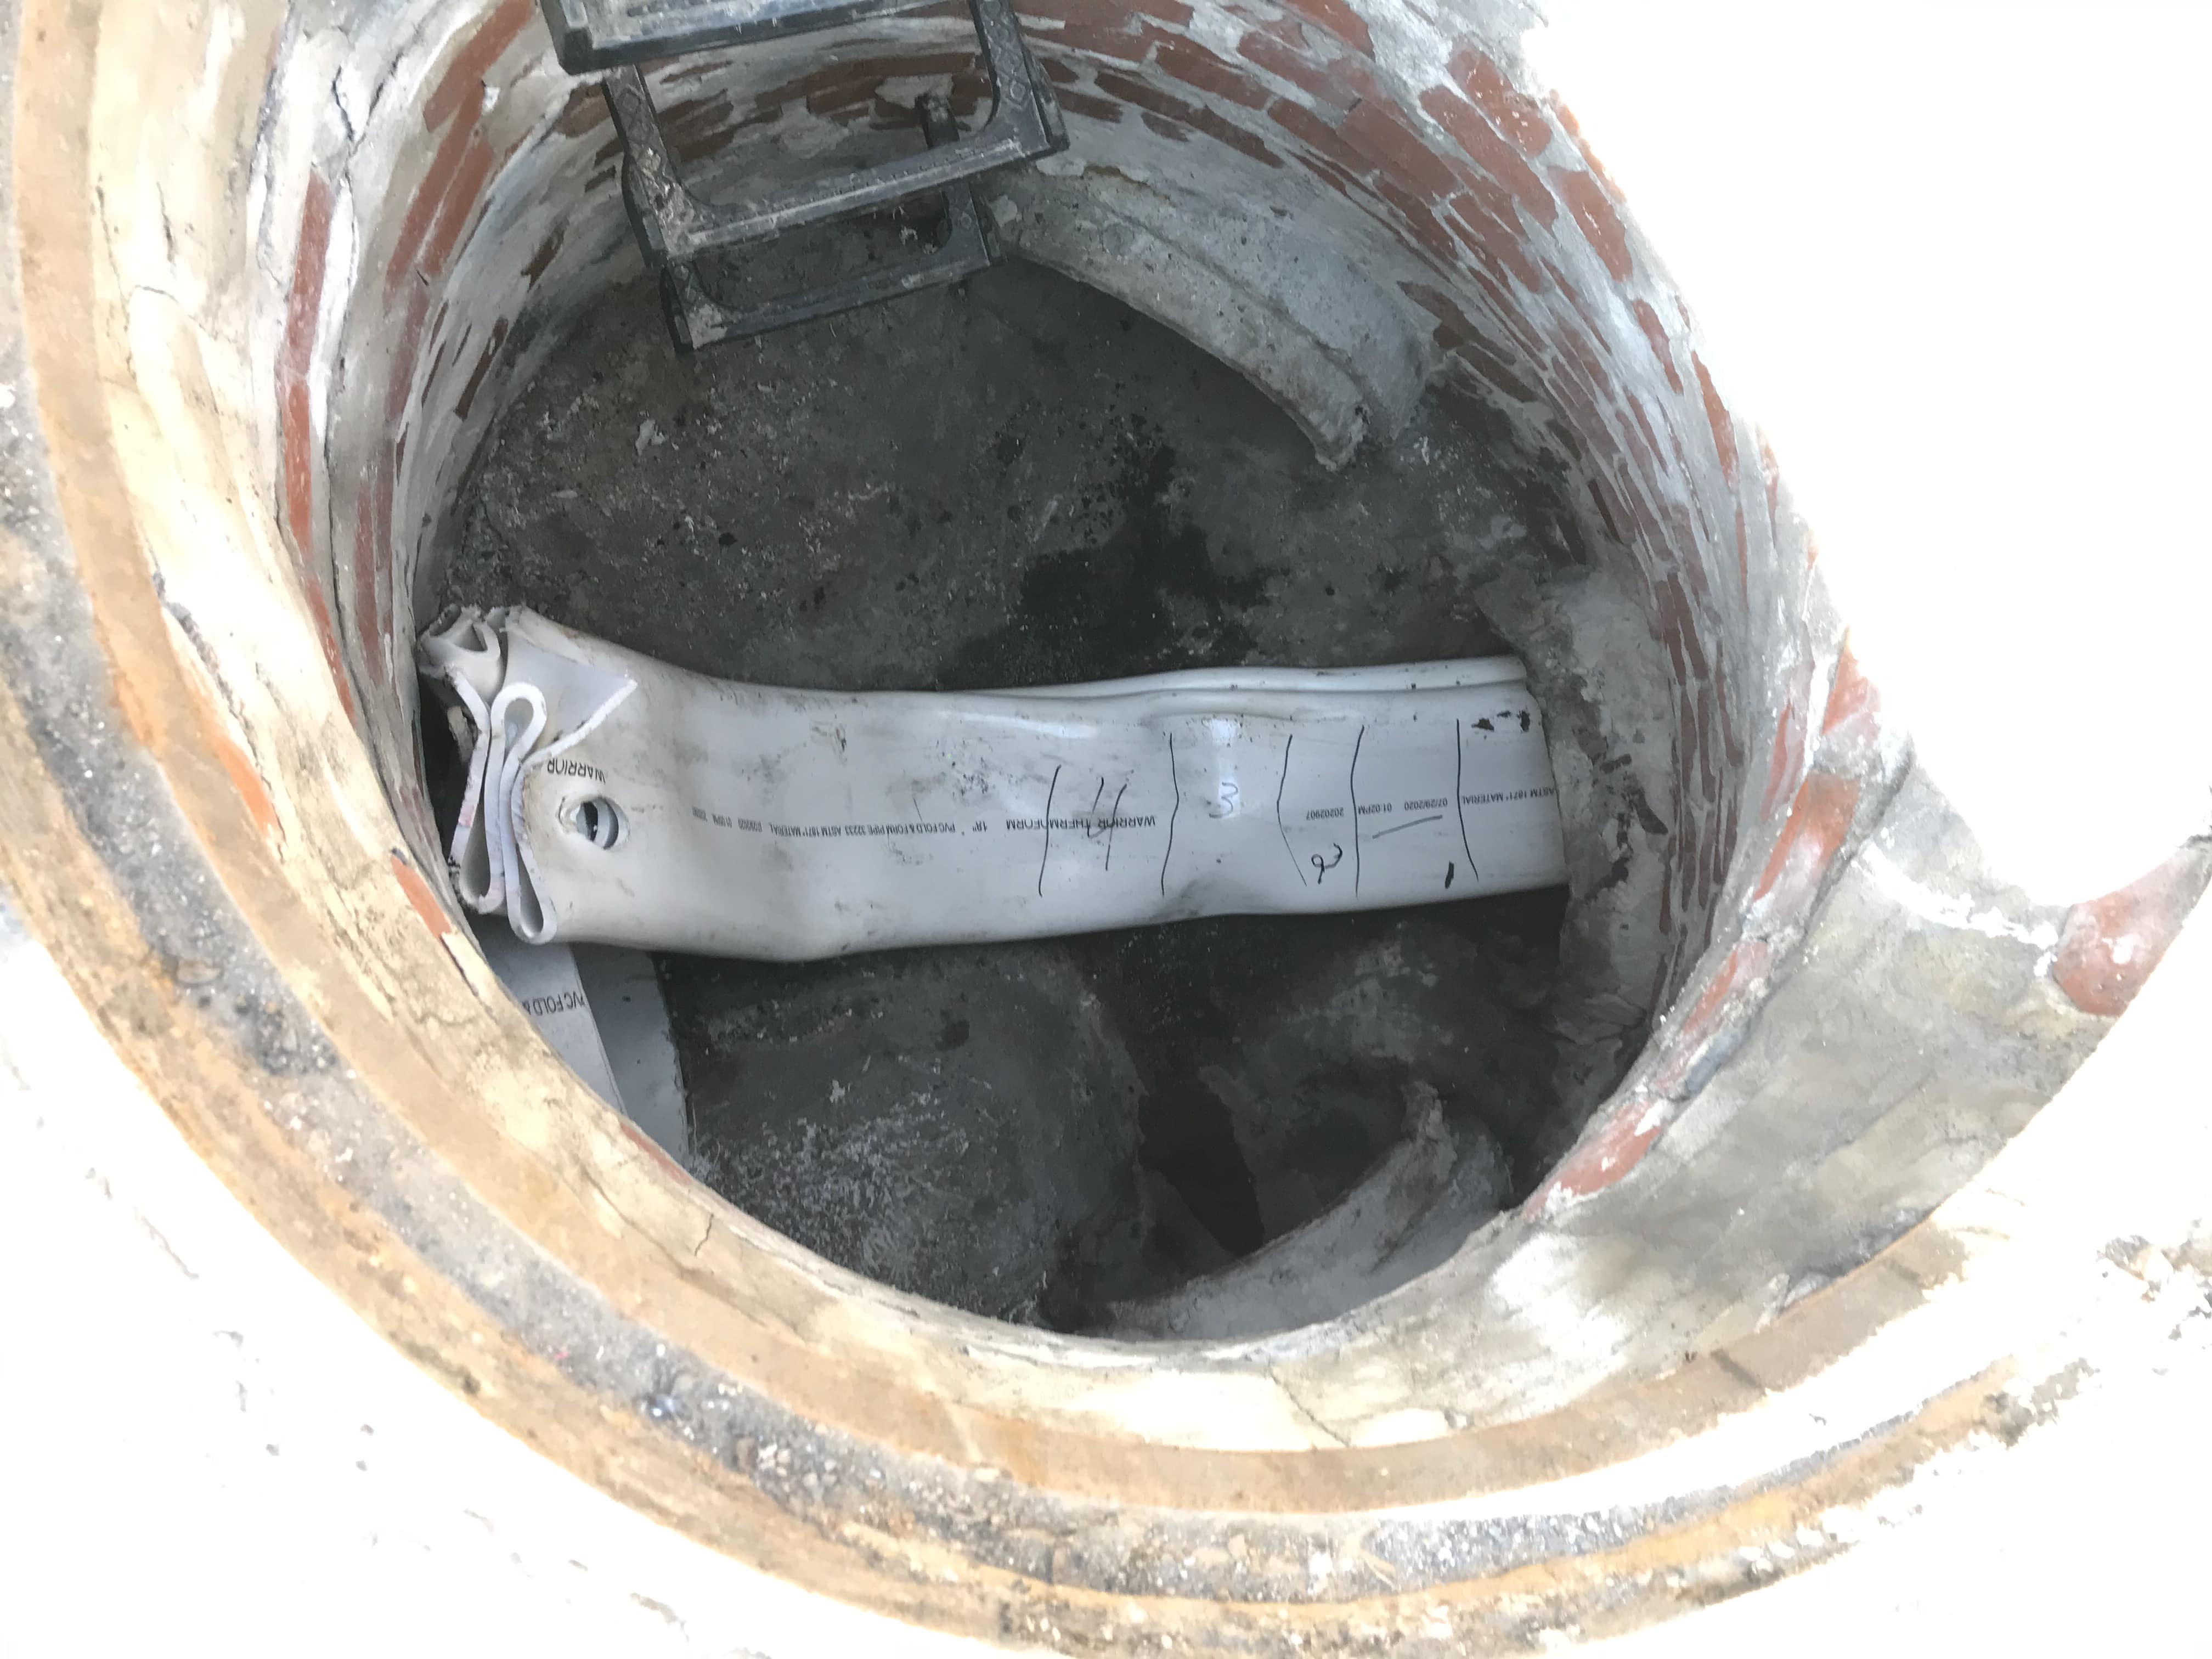 An image of the inside of a manhole cover where the special white PVC liner has been successfully pulled through the pipe